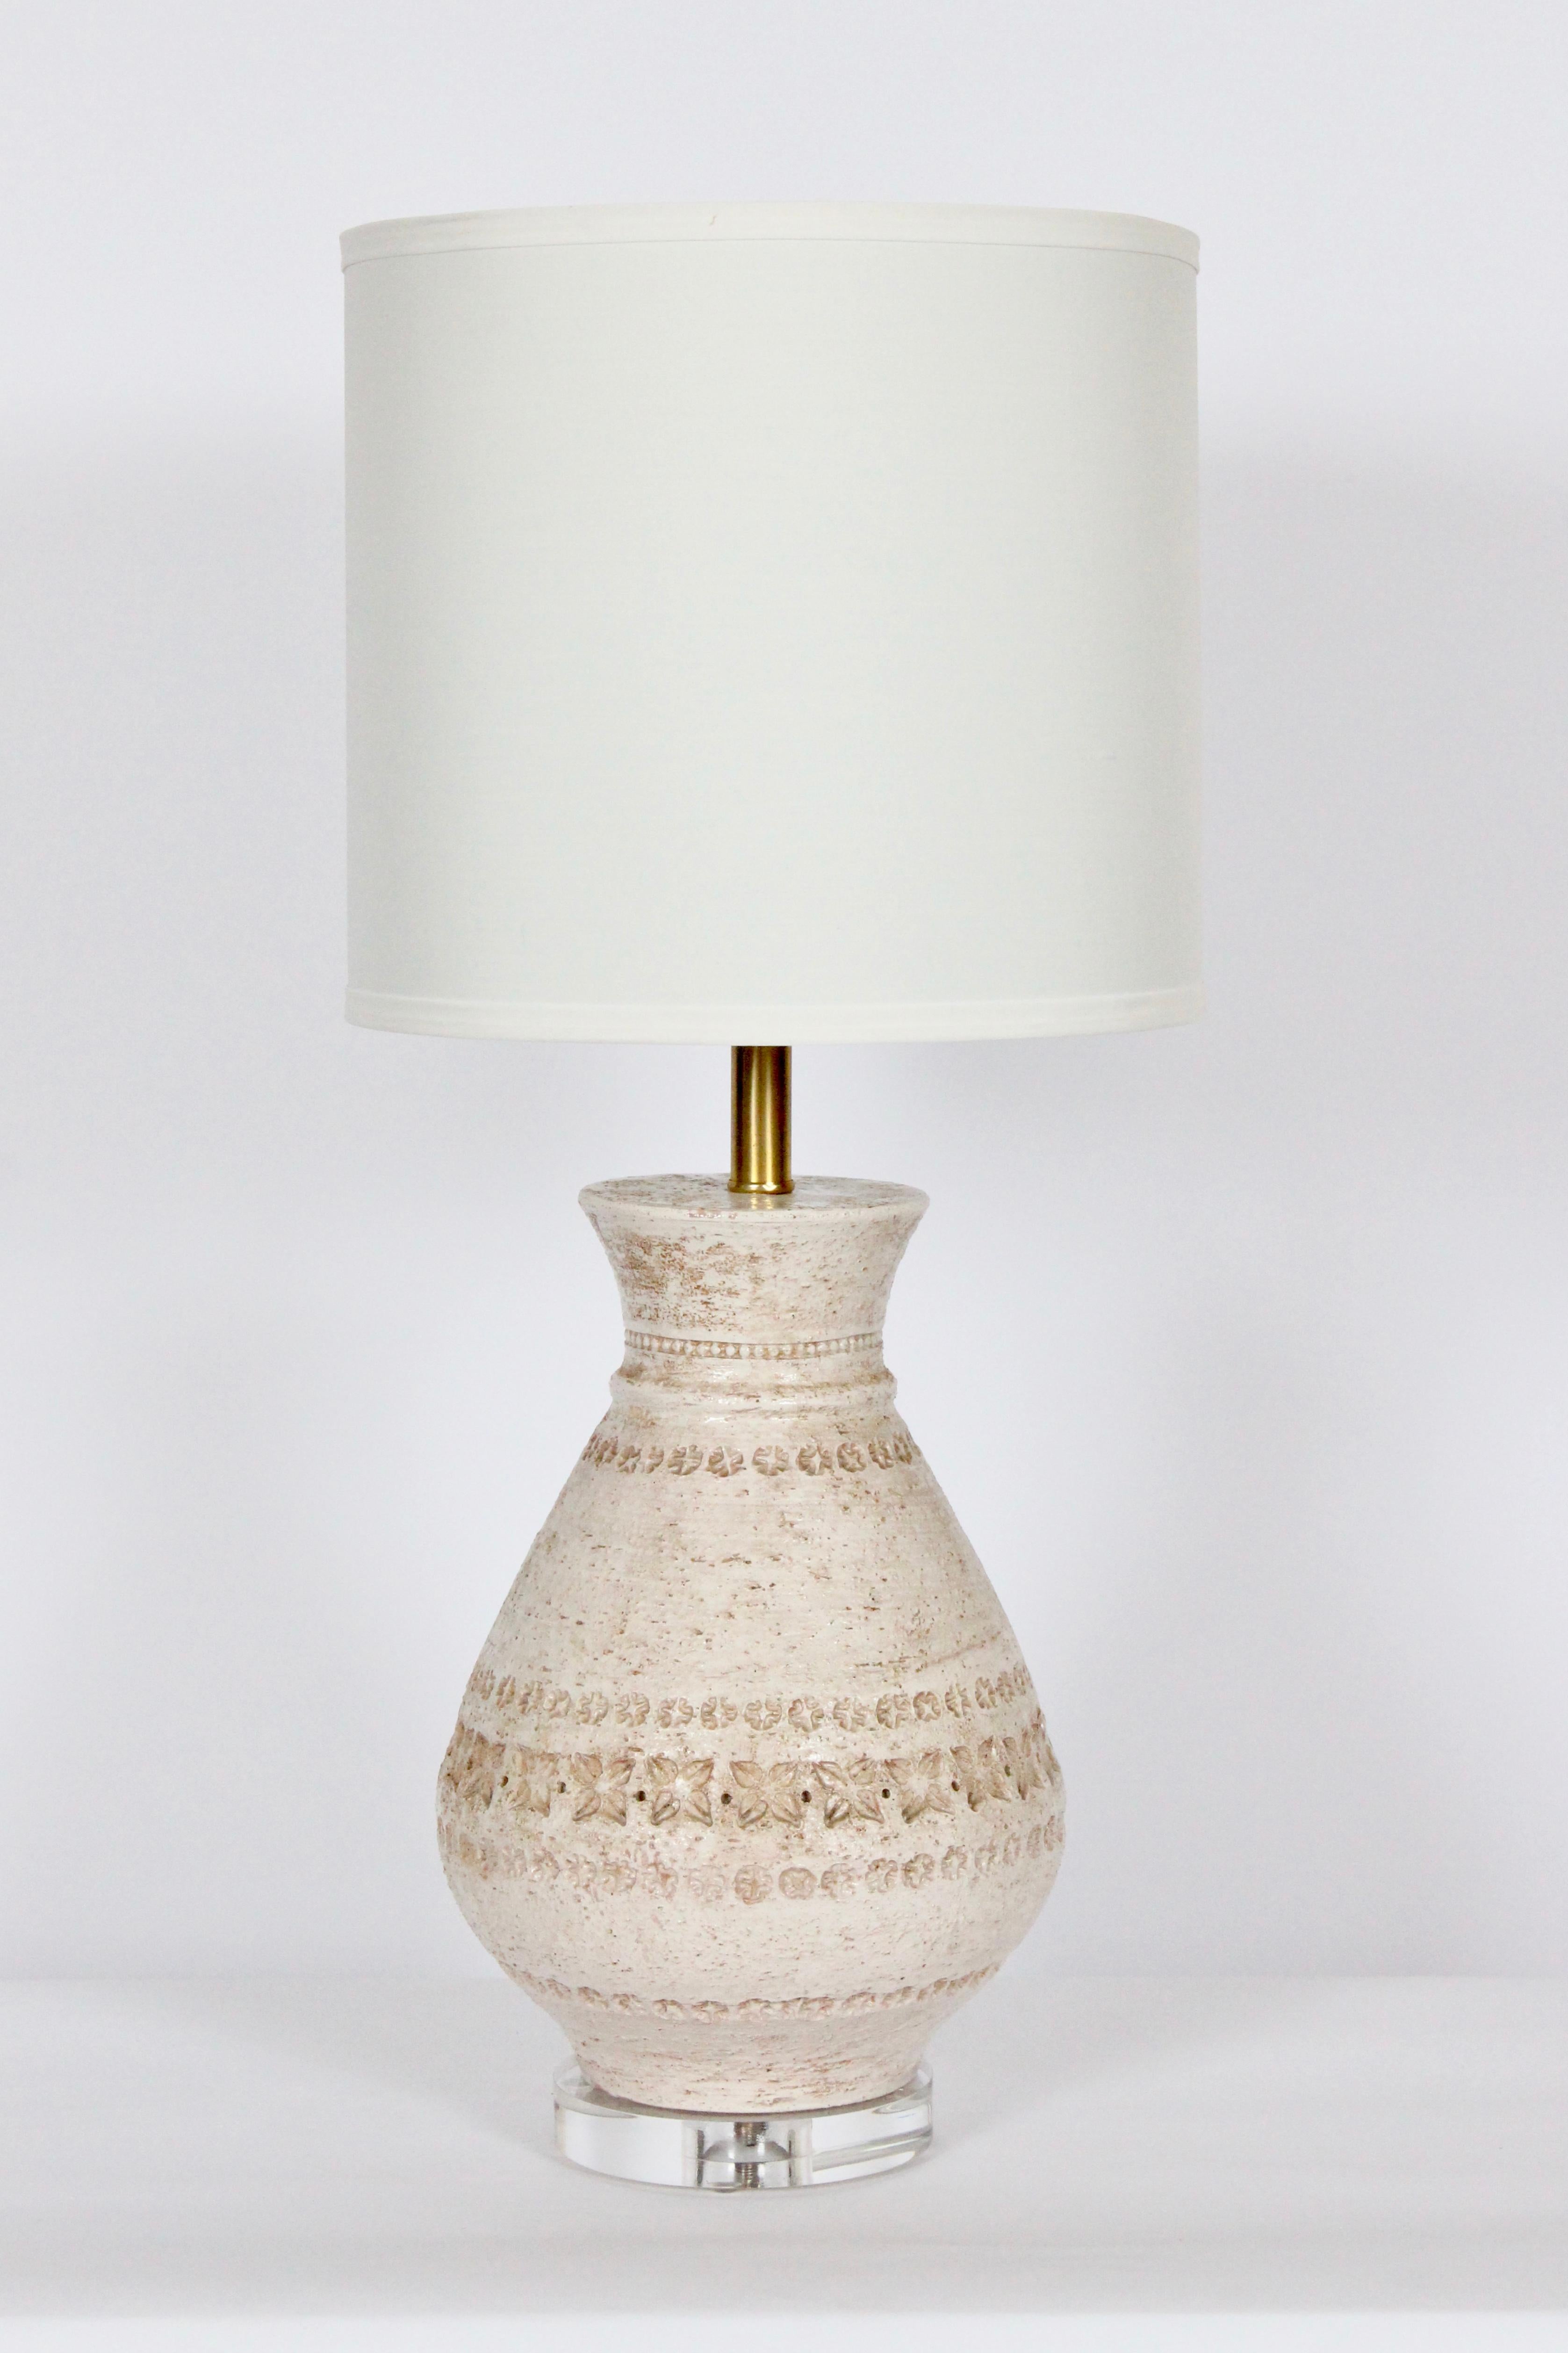 Mid-Century Modern Aldo Londi for Bitossi Imprinted Cream and Off White Glazed Pottery Table Lamp For Sale